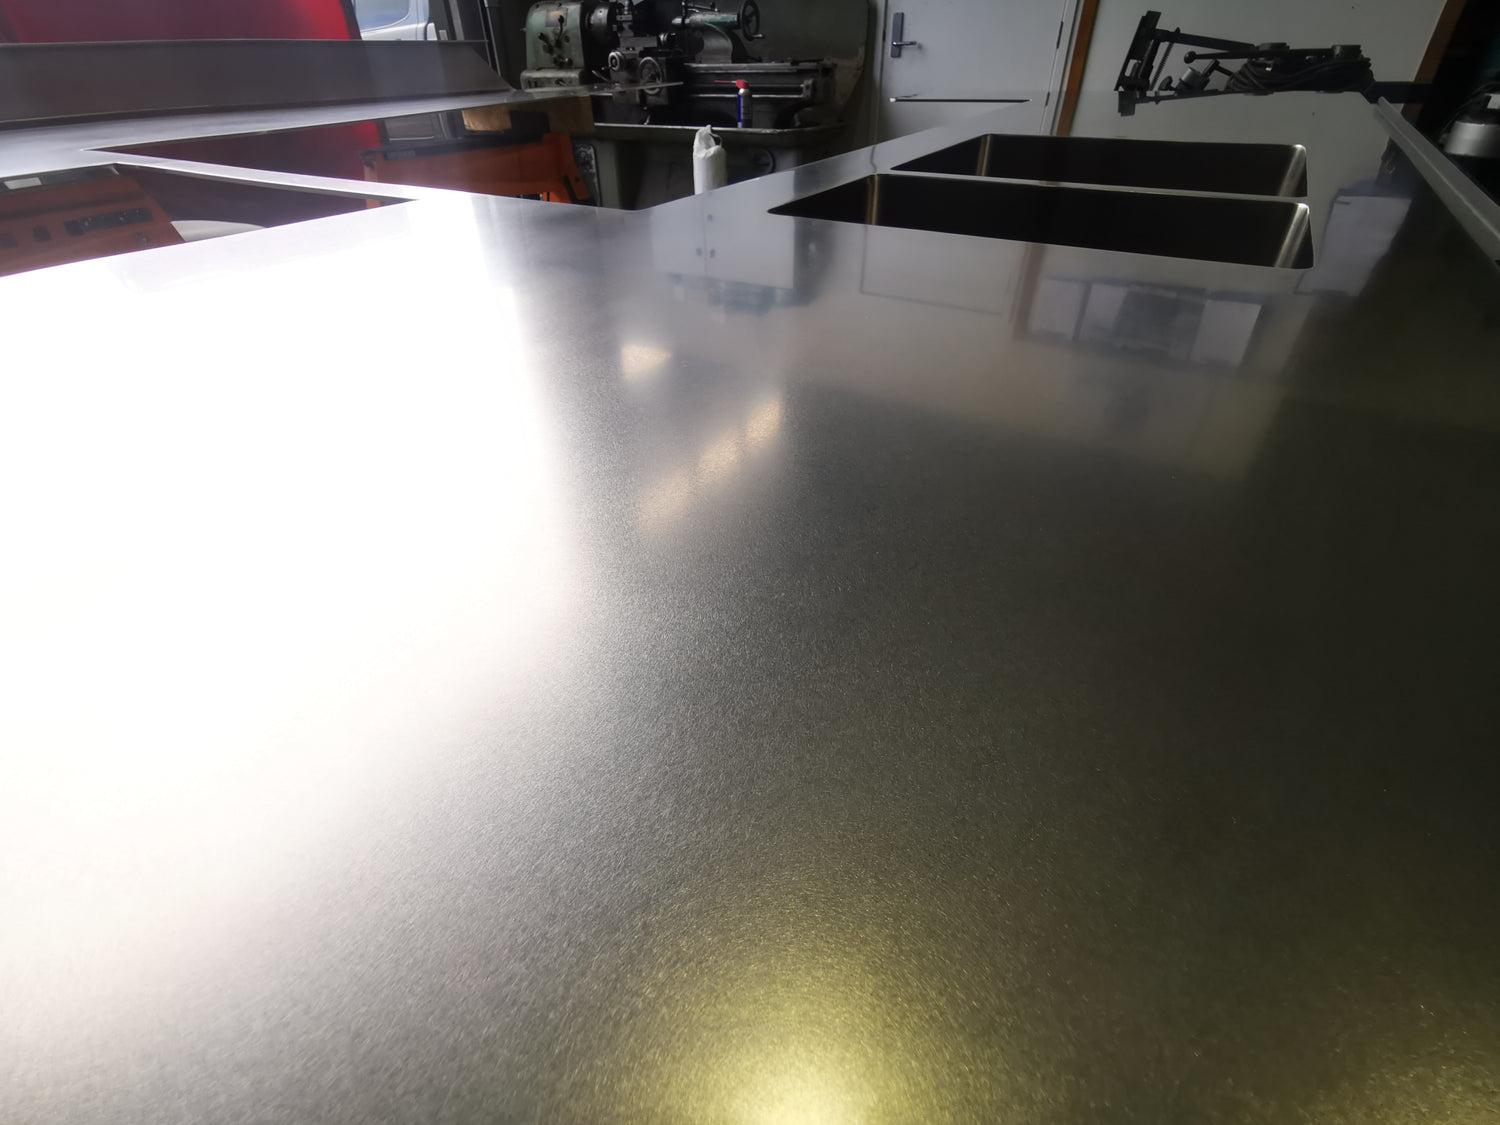 We complete our stainless steel benchtops with a variety of standard brushed finishes: